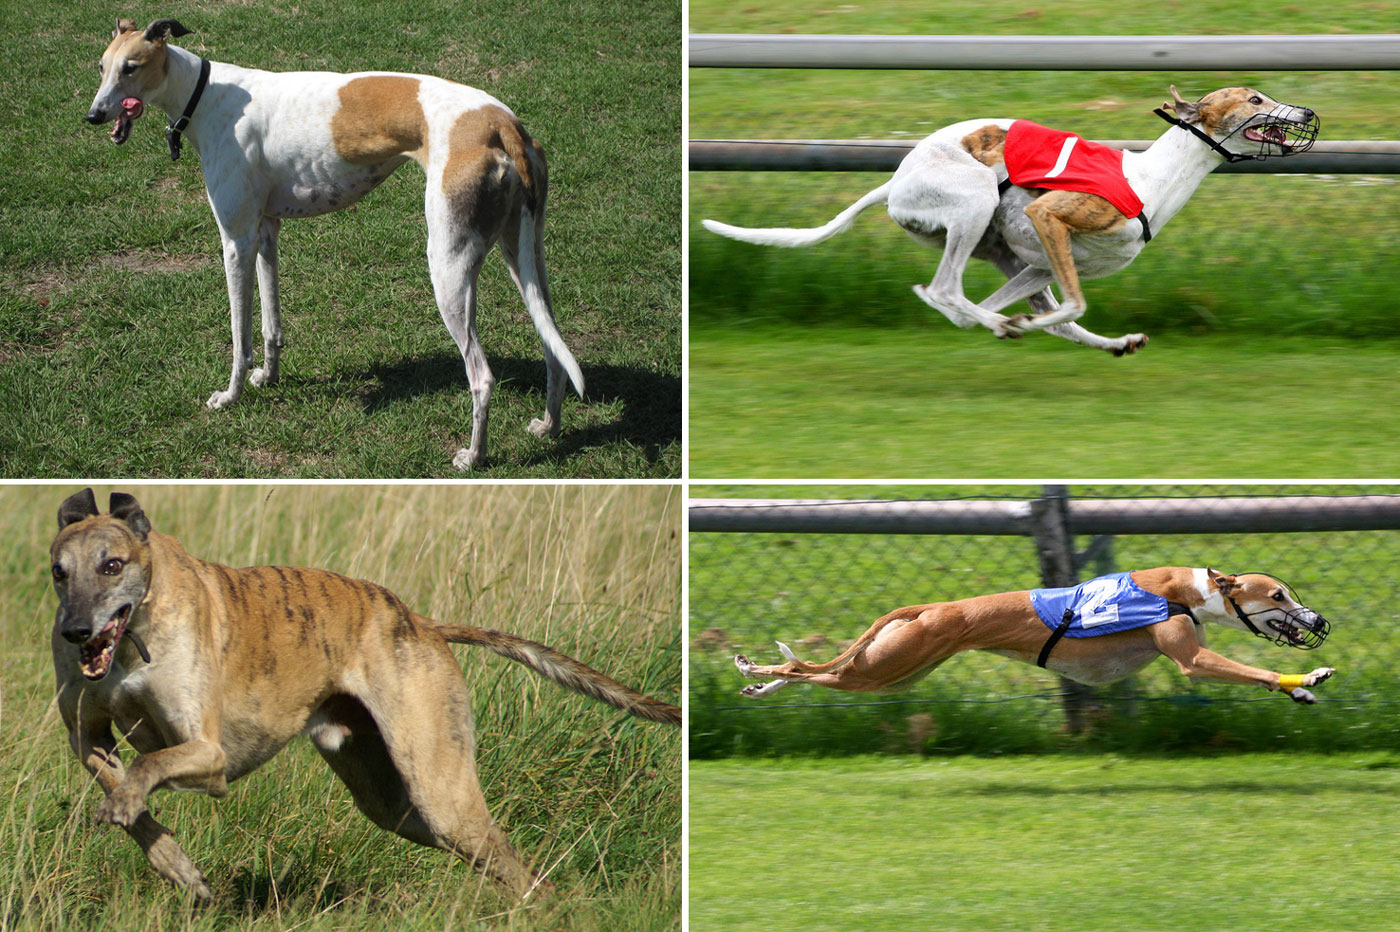 Fact: Greyhounds are the fastest dogs in the world